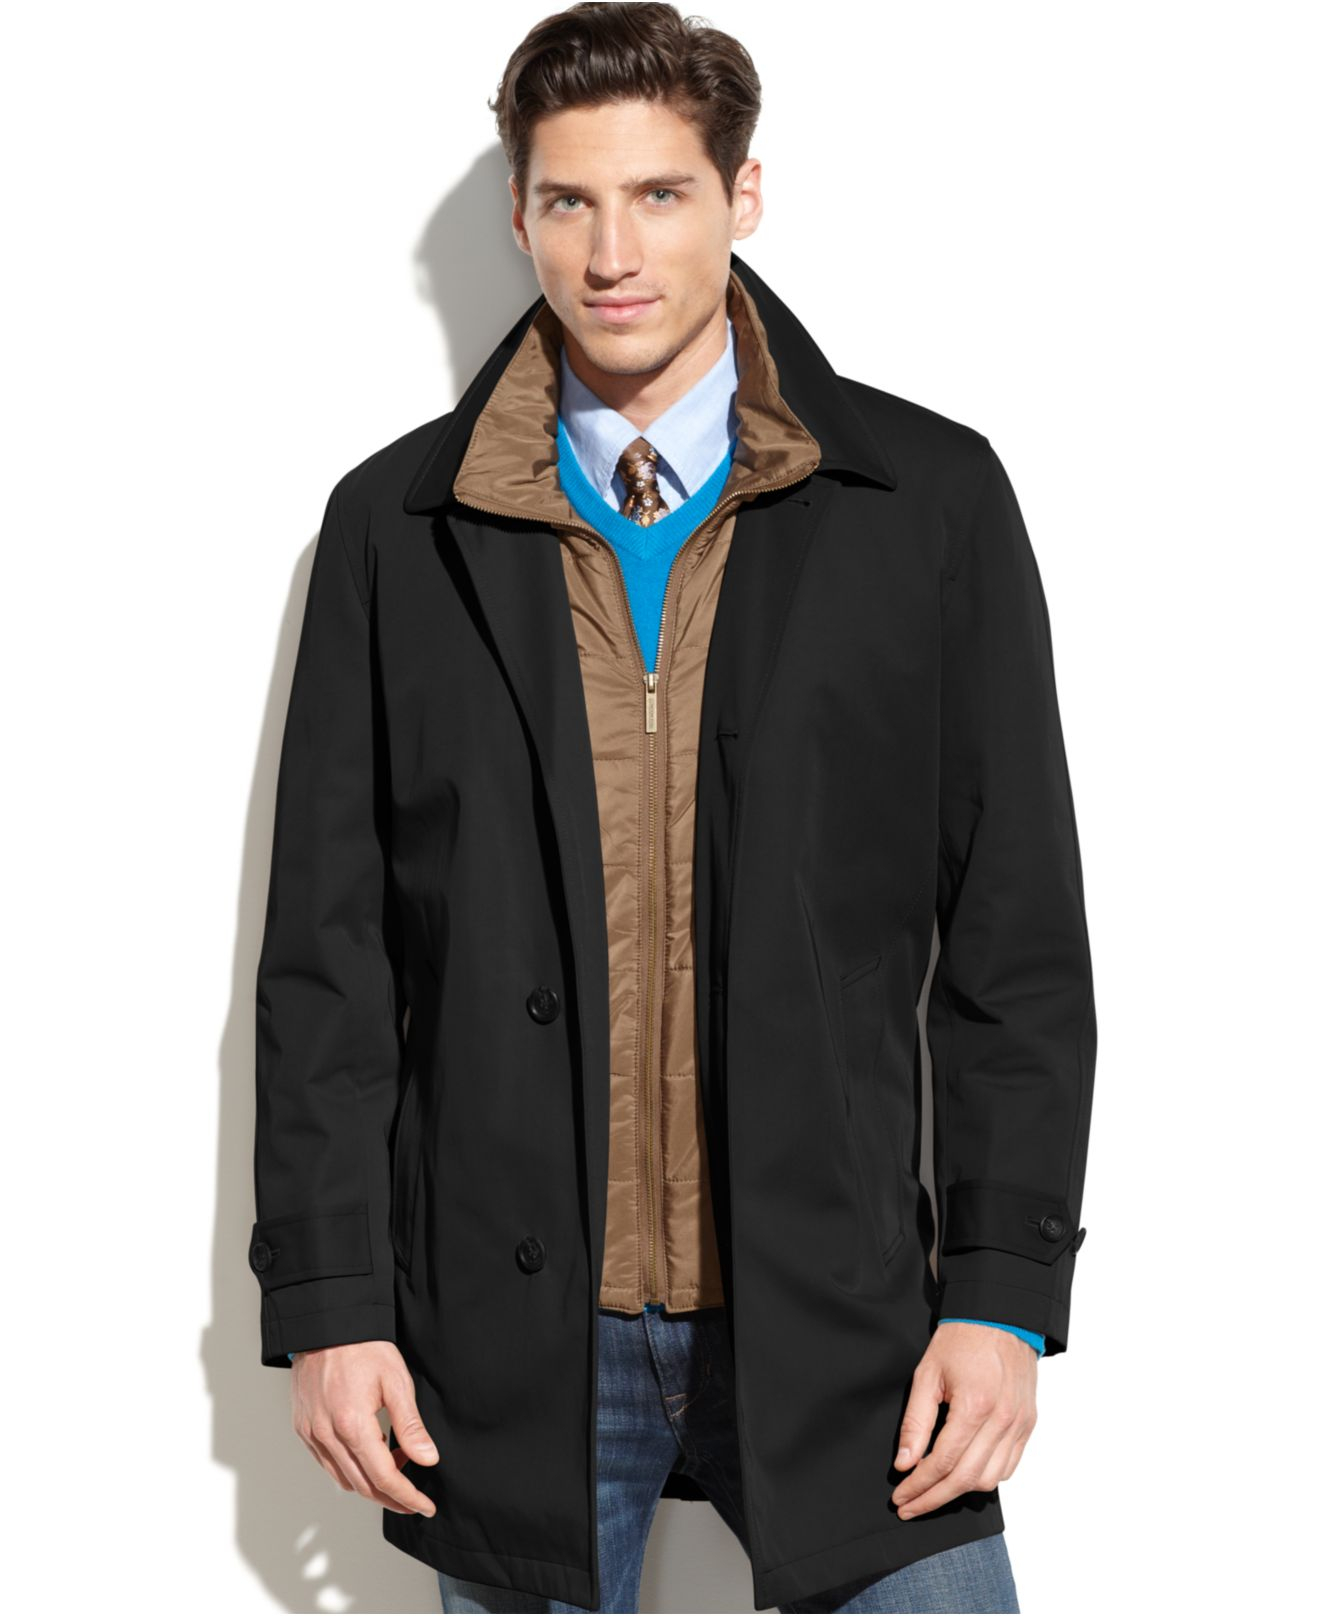 Lyst - London Fog Bailey All Weather Trench Coat in Black for Men